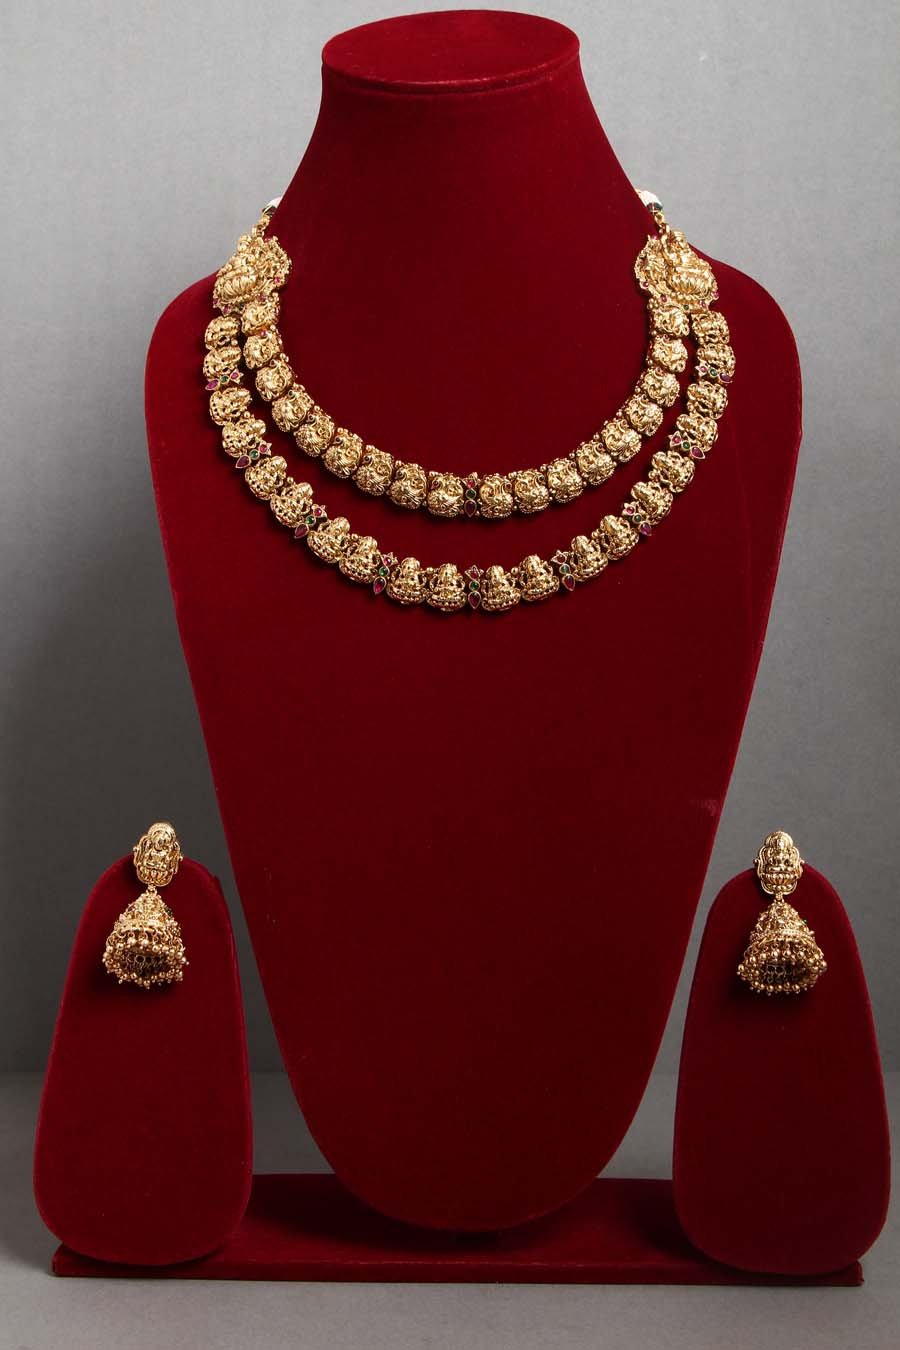 Classy Layered Gold Necklace - N1388